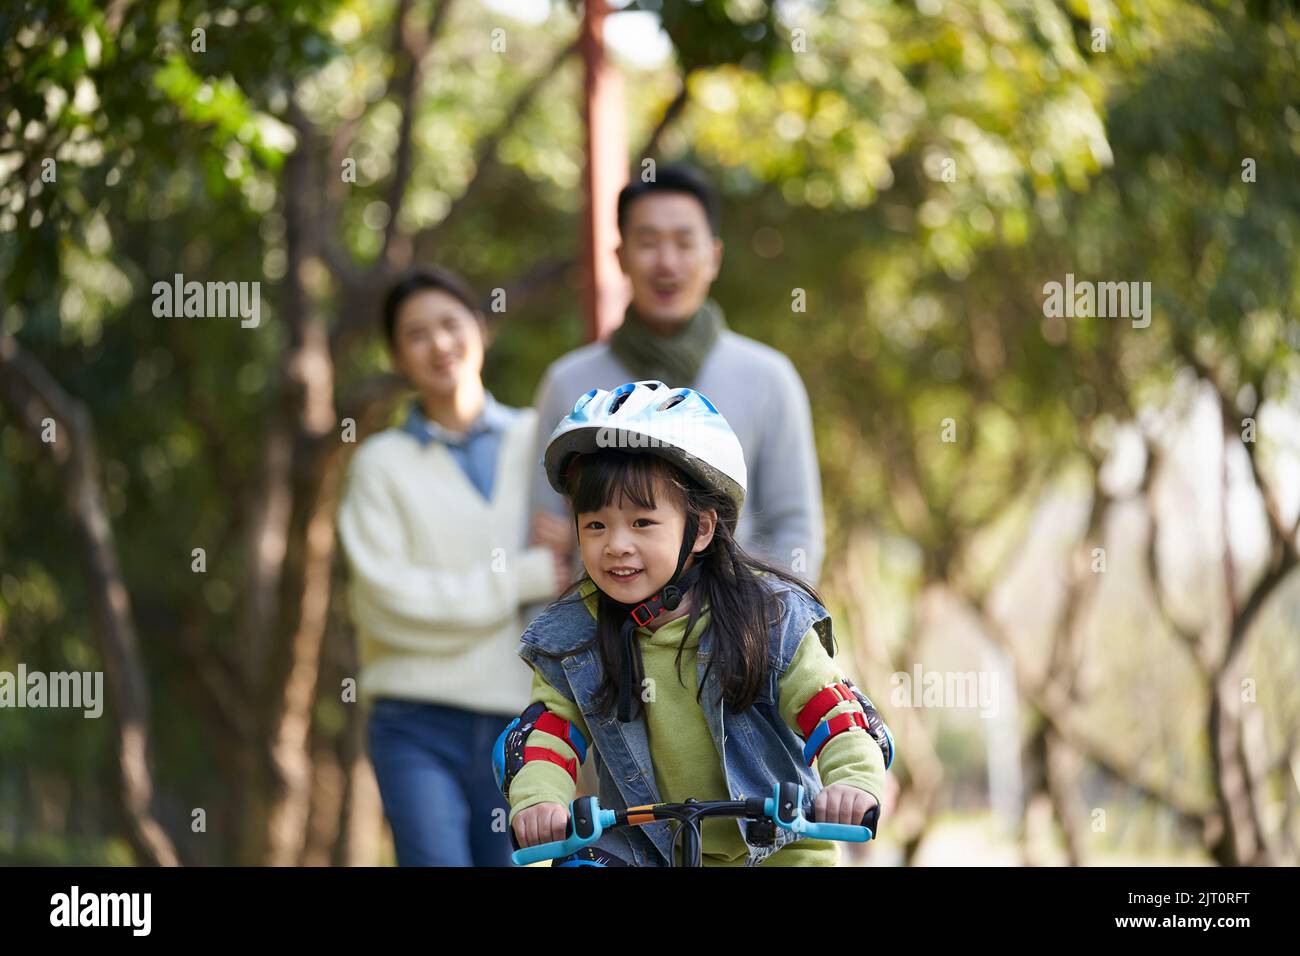 little asian girl riding bike in city park with parents in background Stock Photo